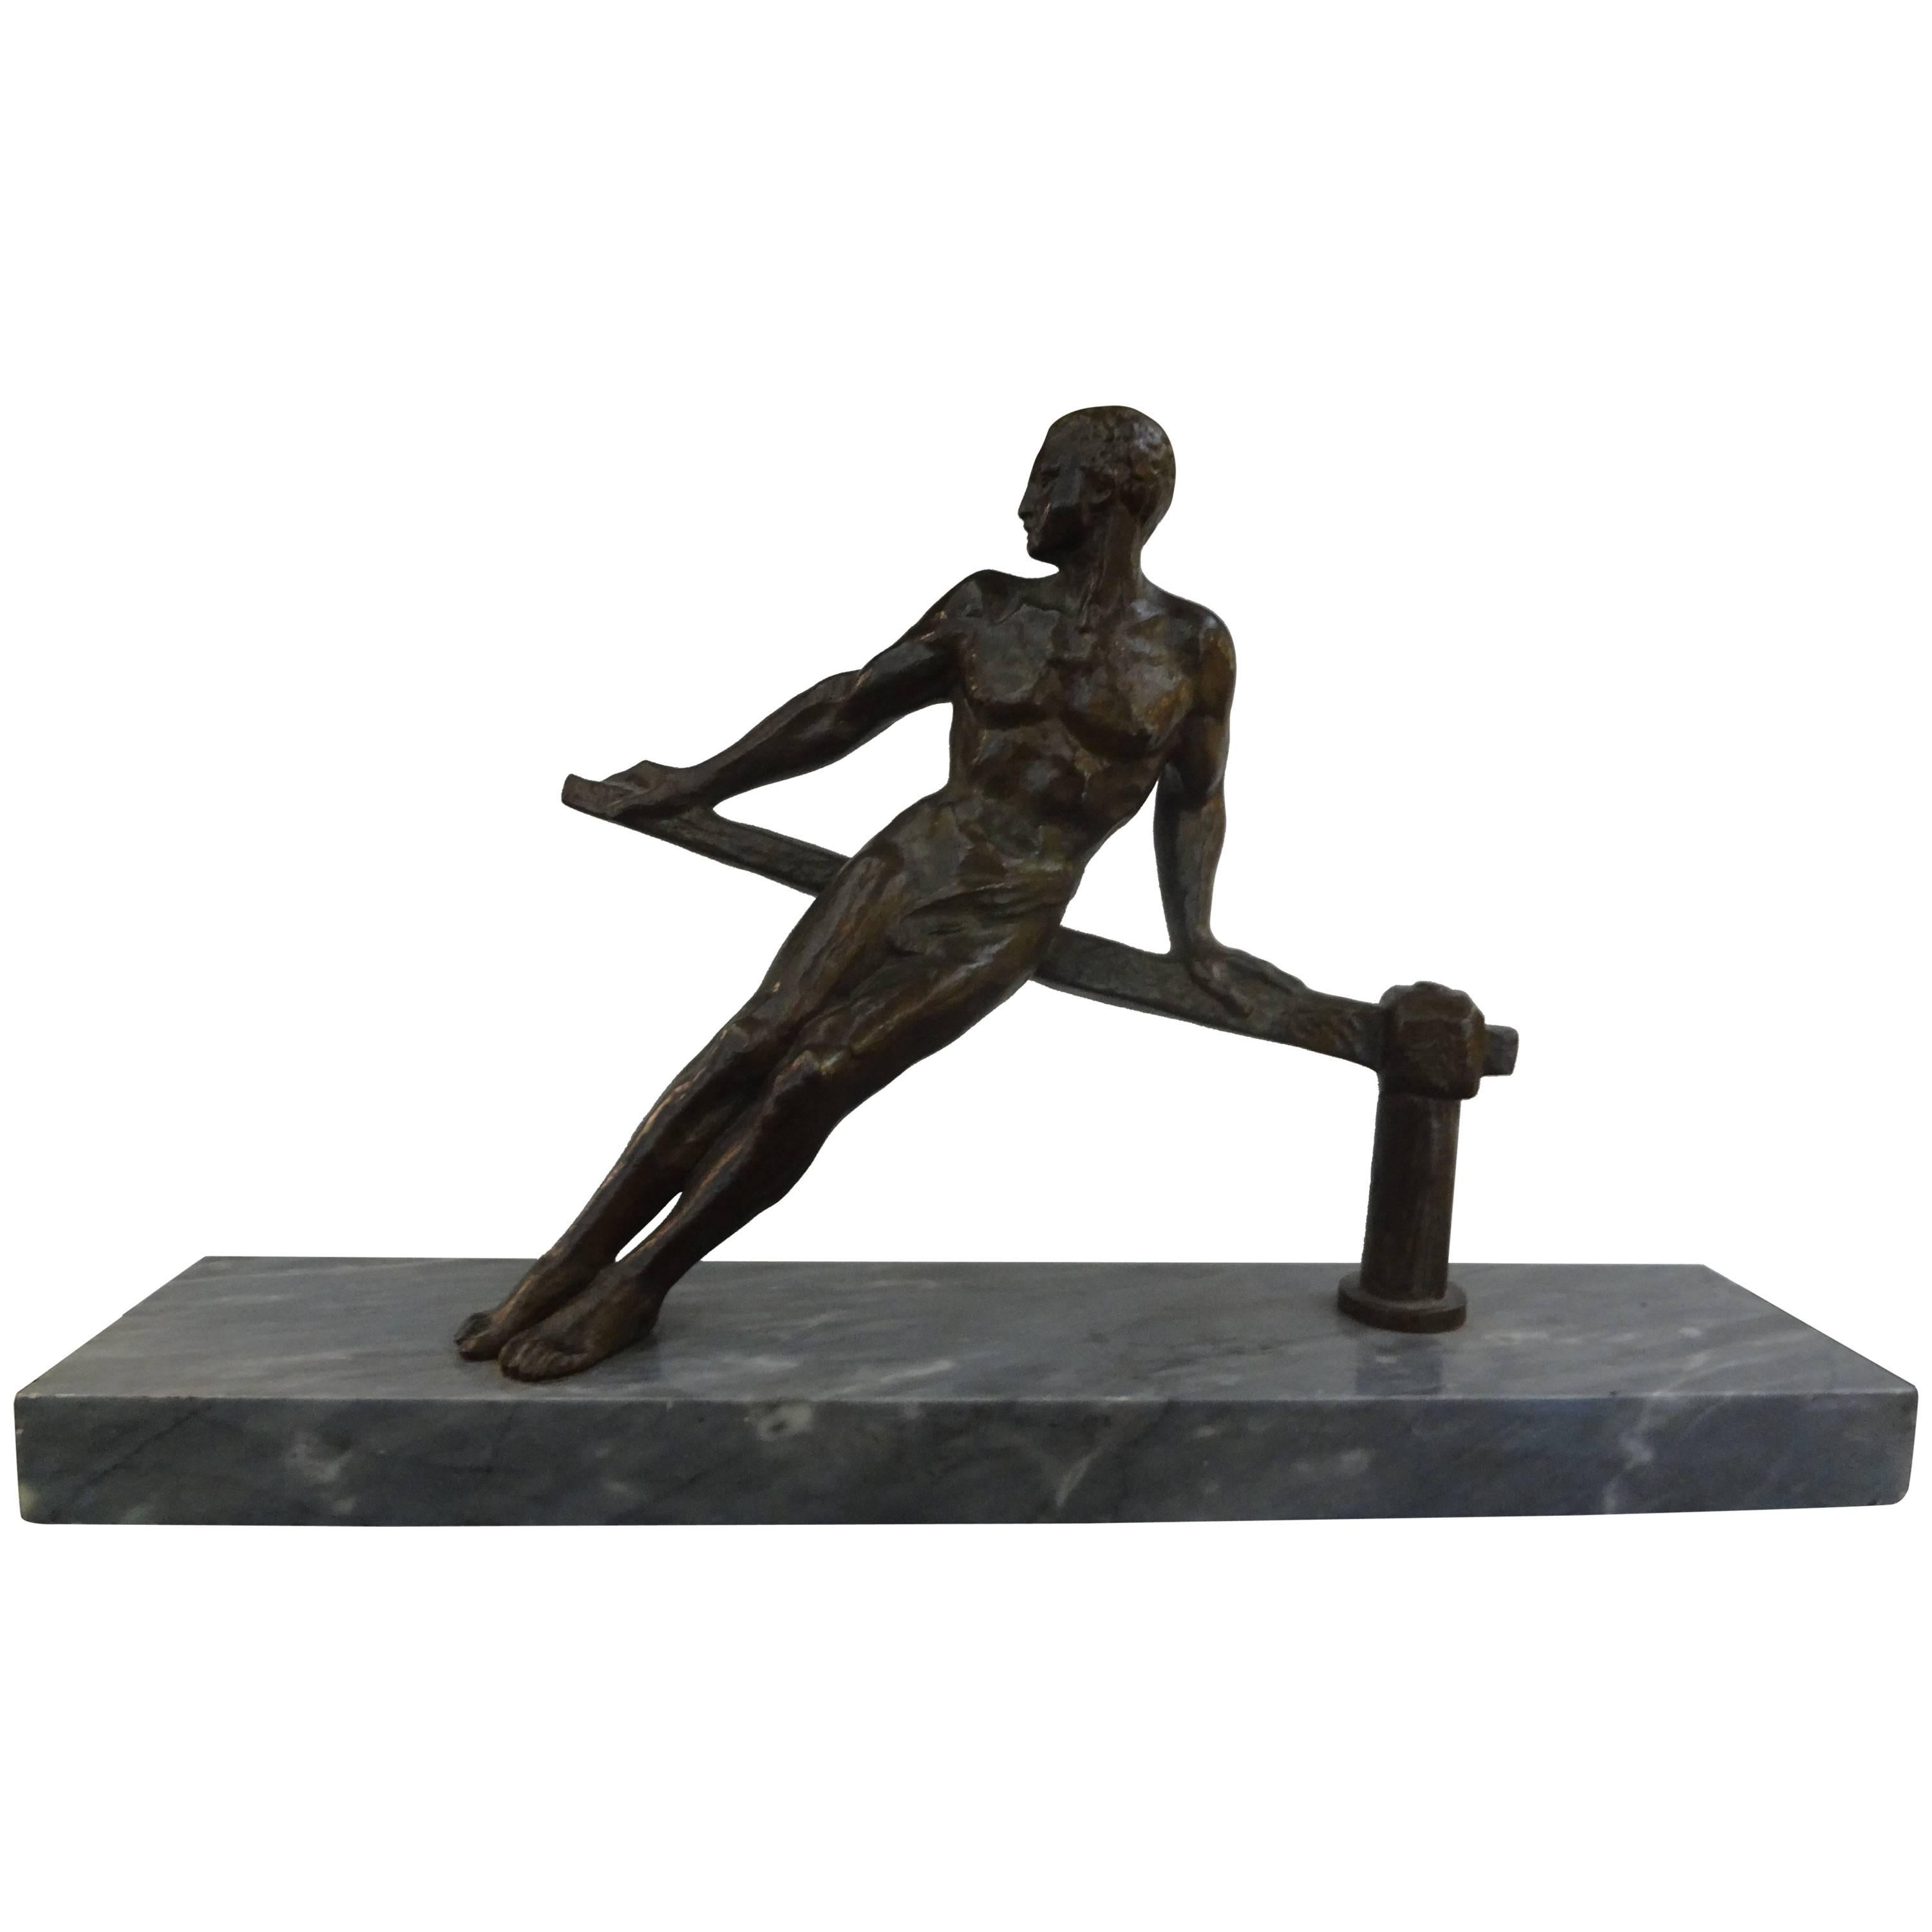 Handsome period French Art Deco bronze figure of an athlete on marble base by Henri Fugère, circa 1930.